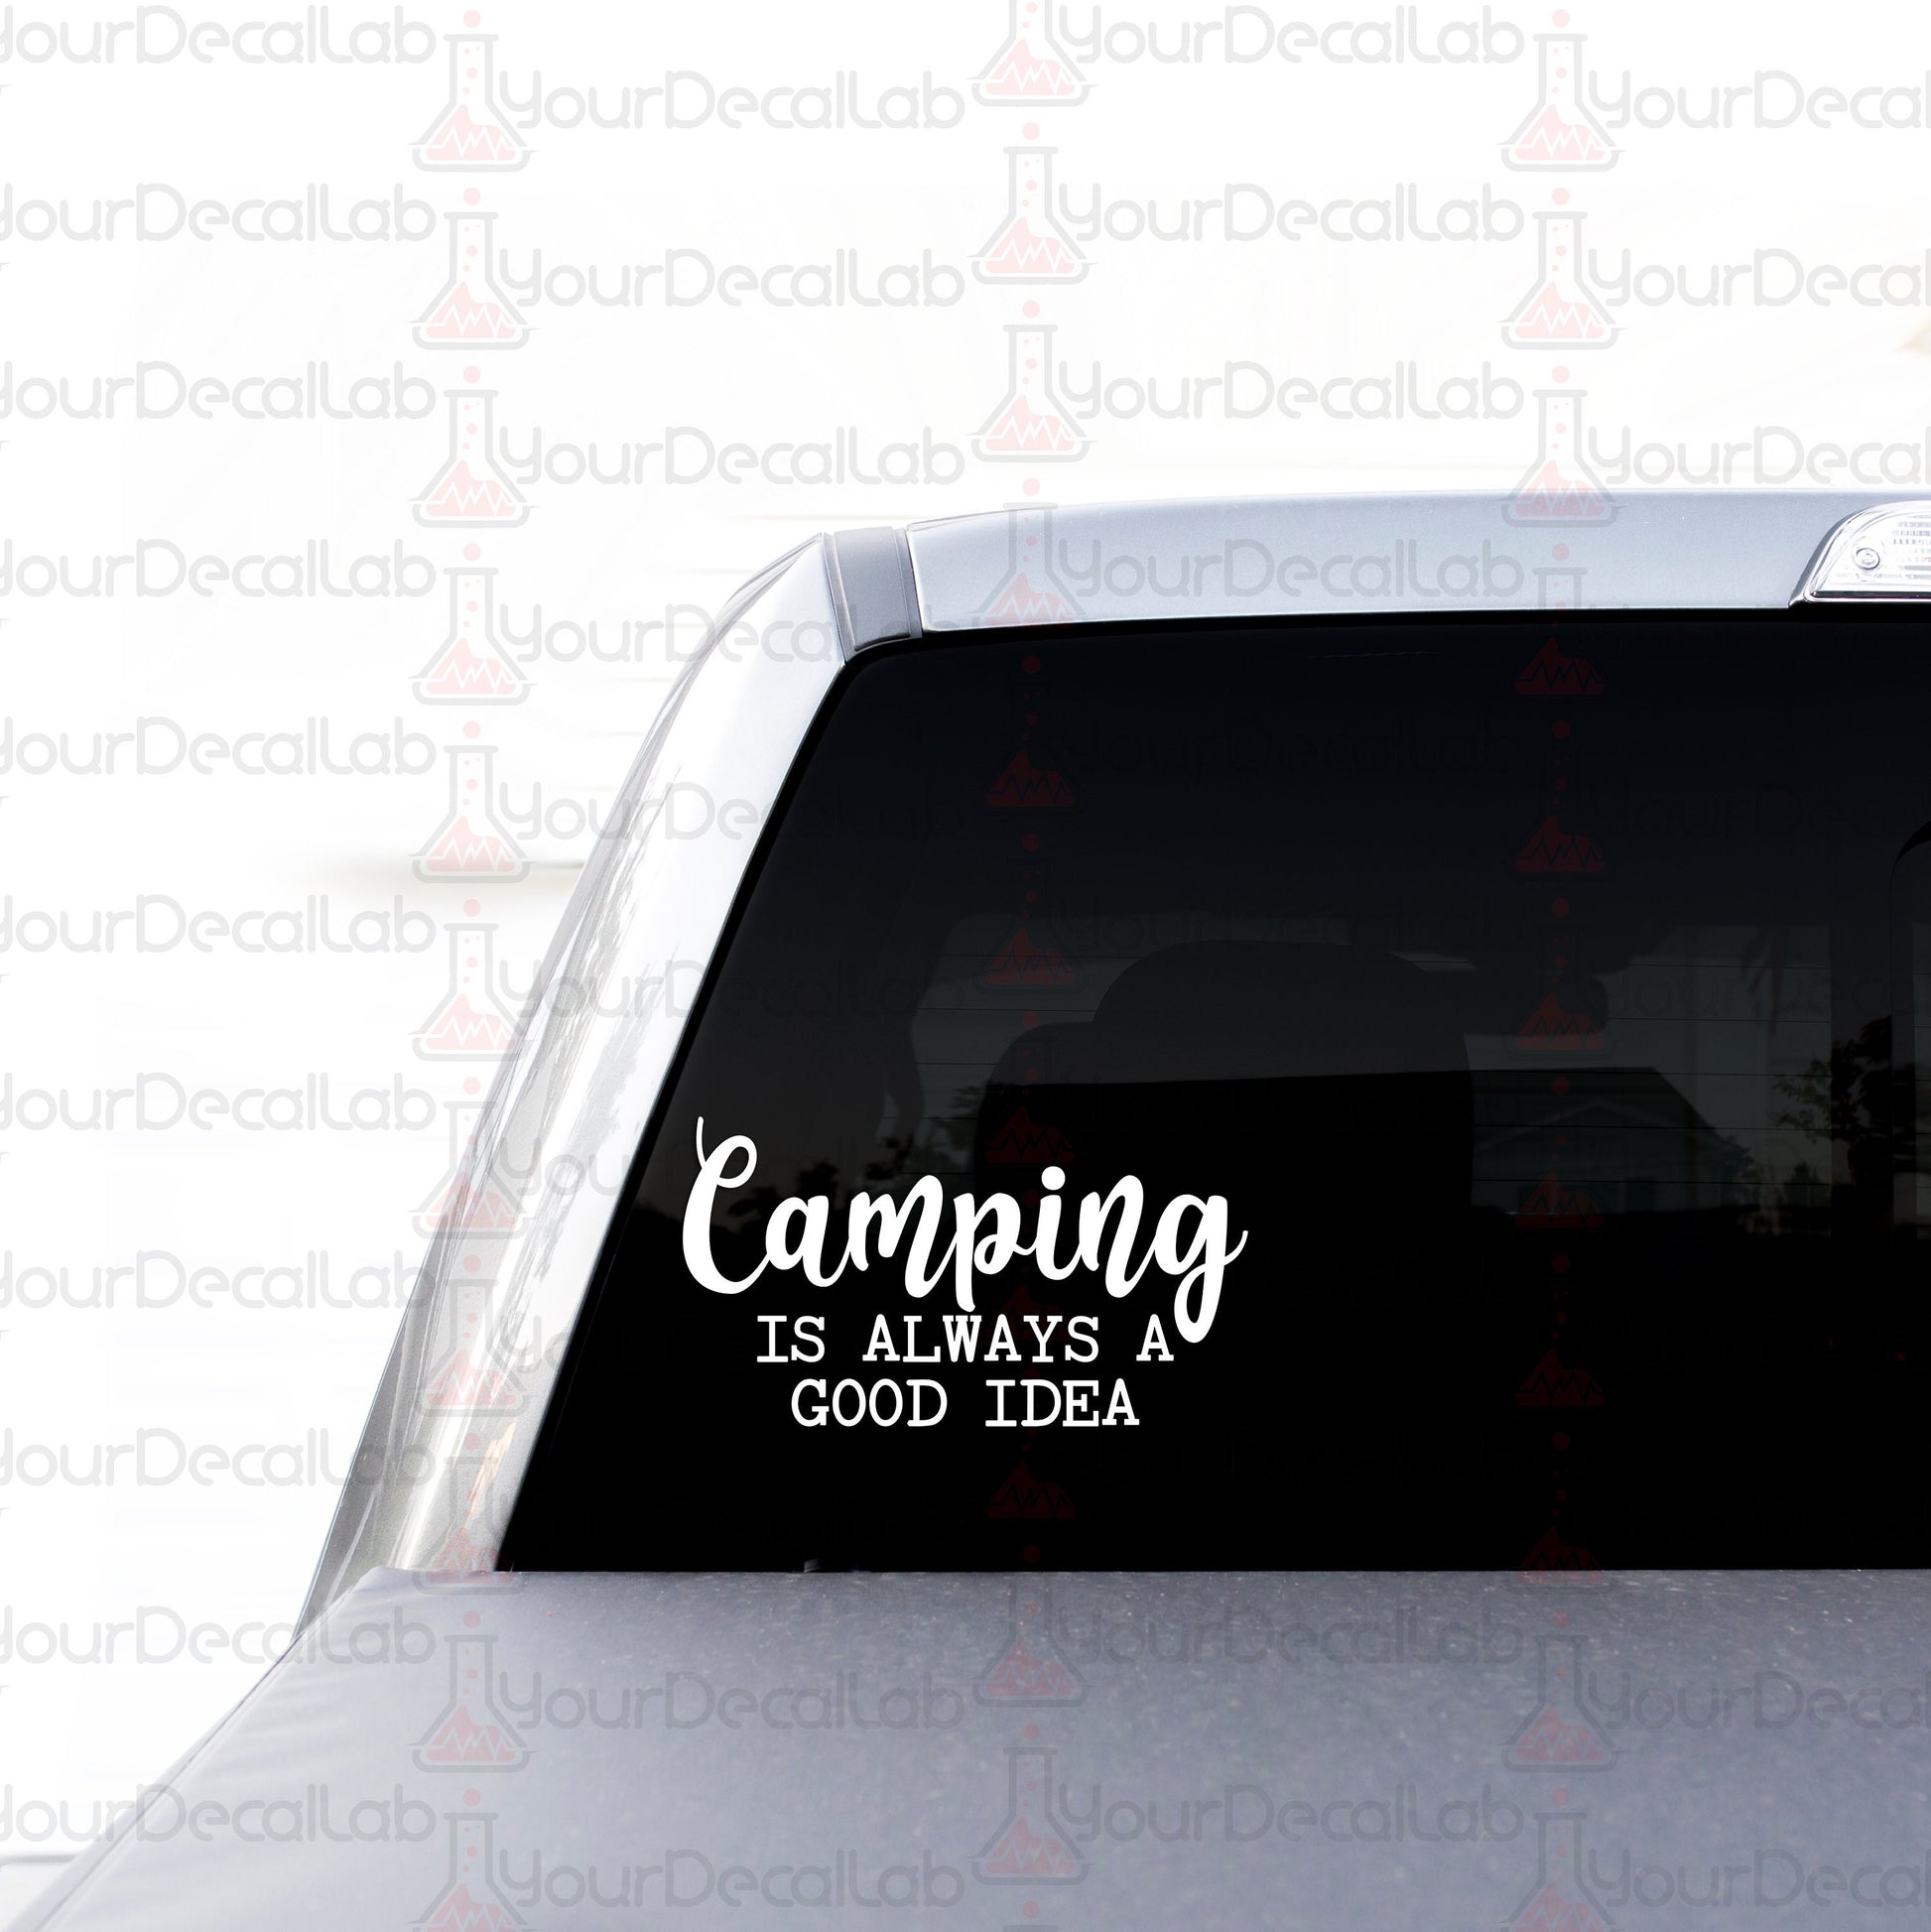 a sticker that says camping is always a good idea